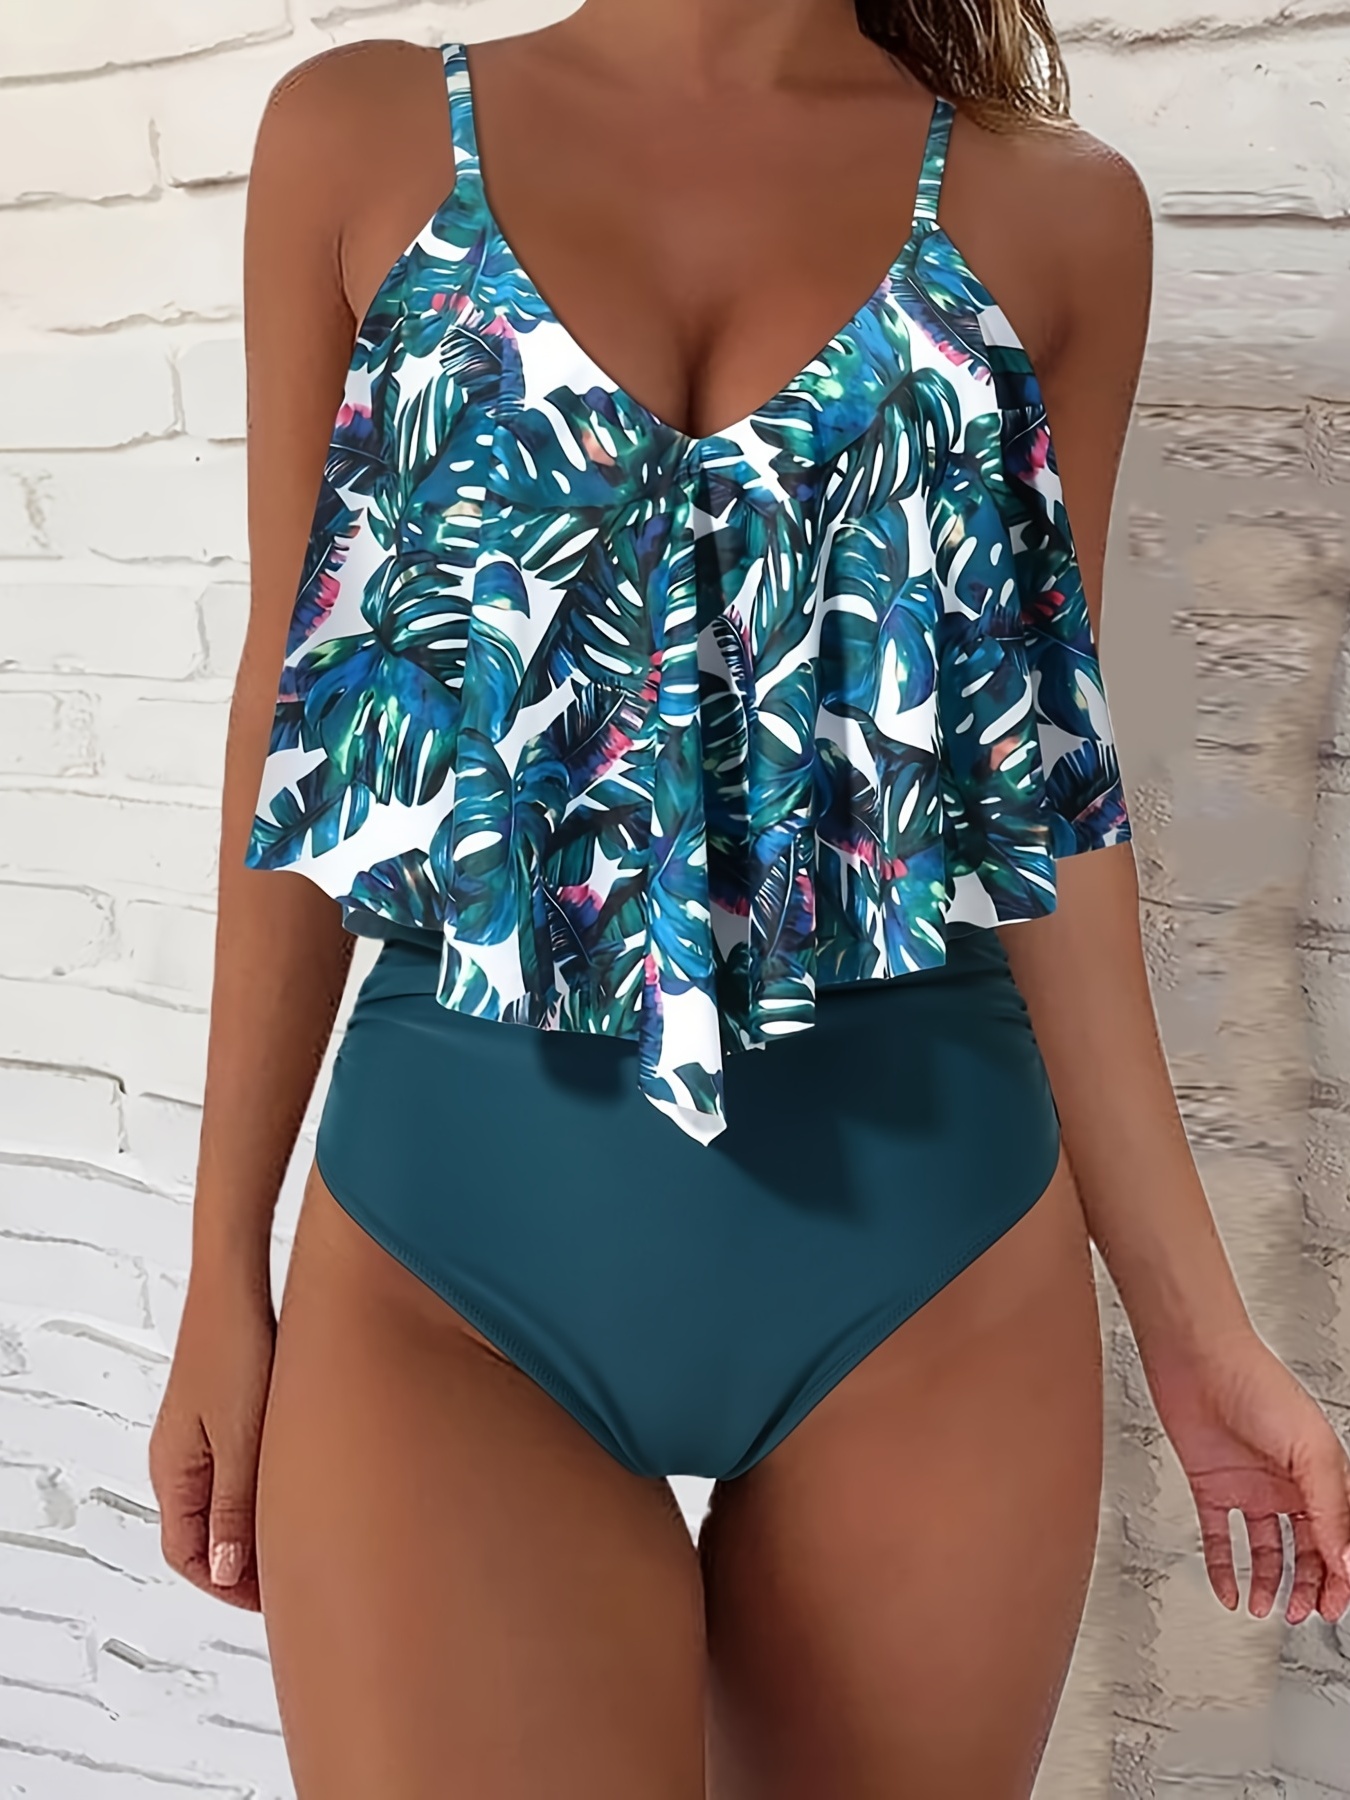 Women Plus Size Padded One Piece Swimsuit Floral Bathing Suit